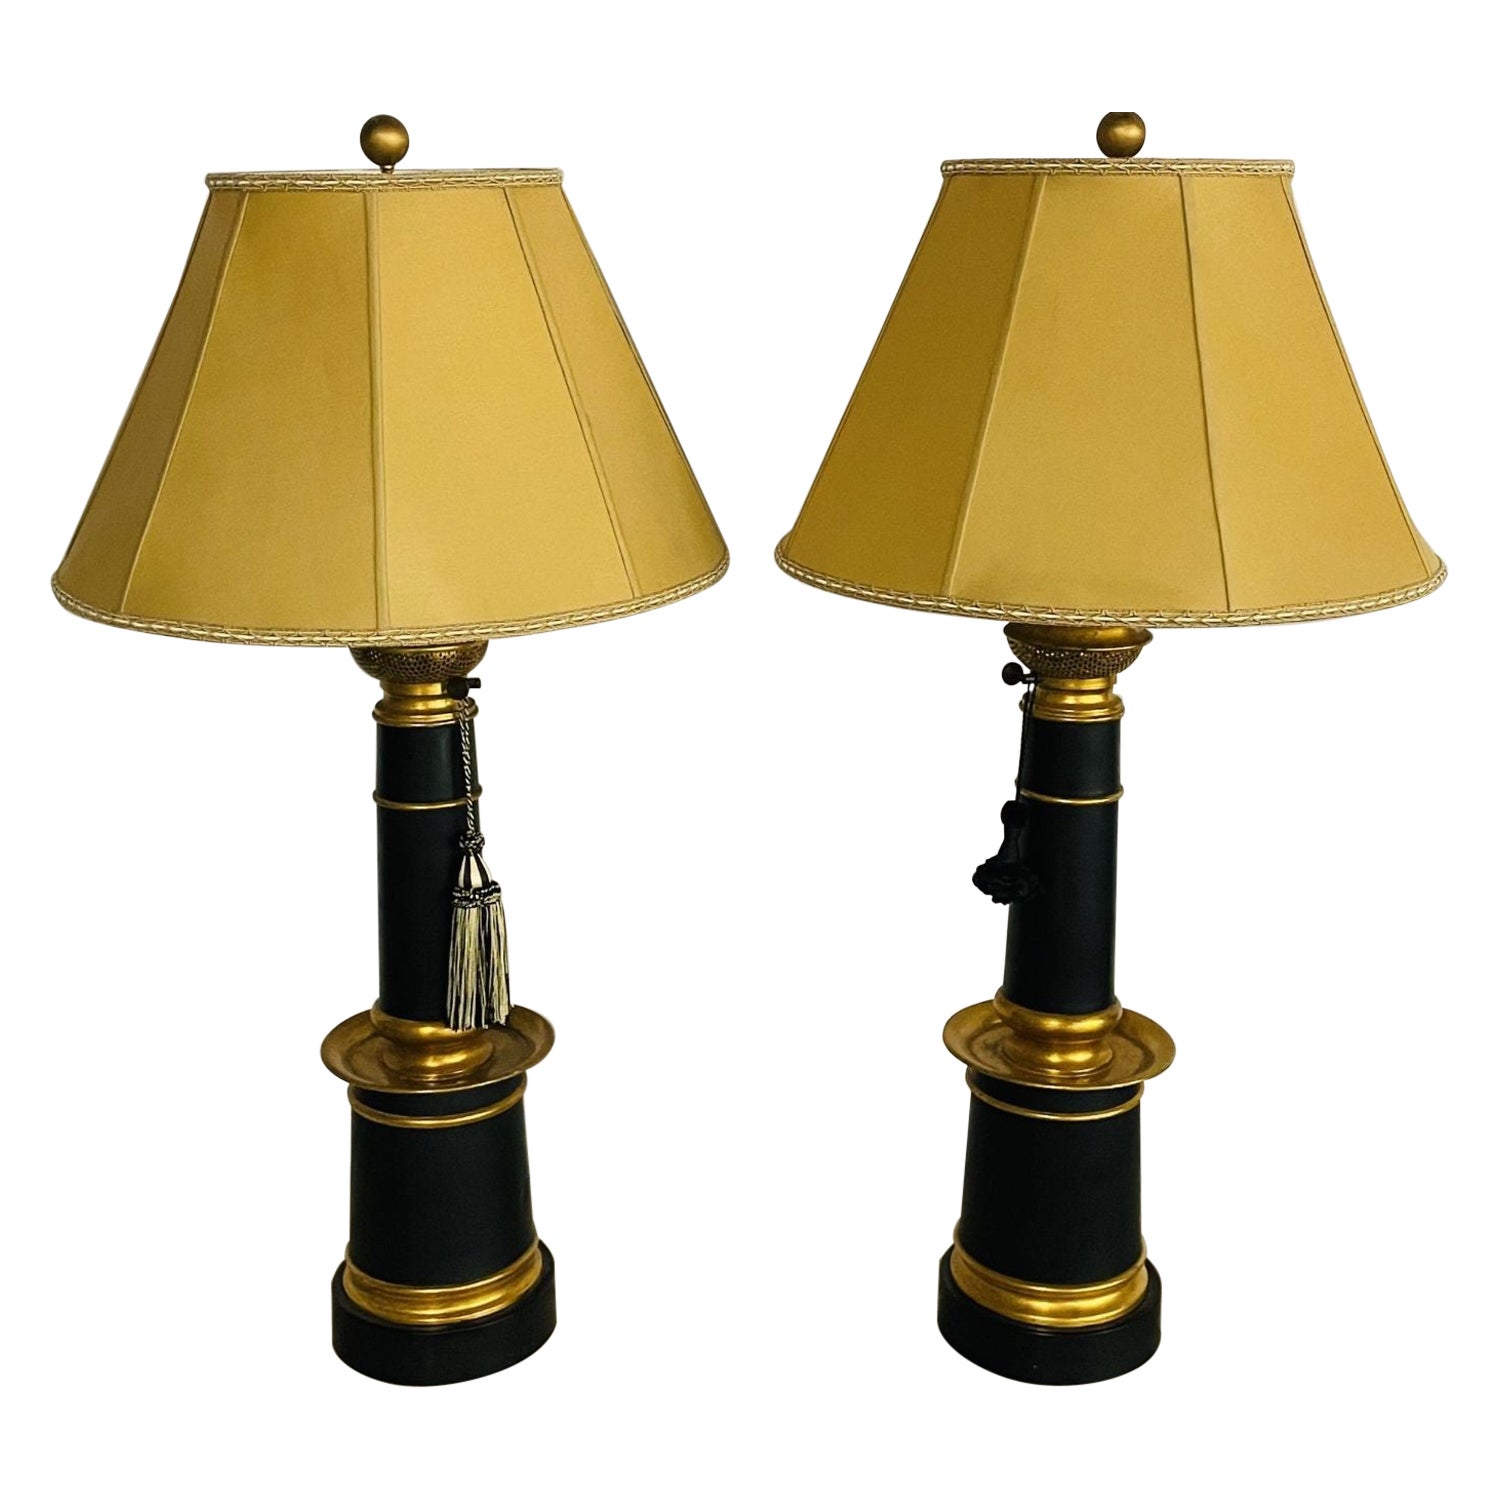 Pair of Hollywood Regency Style Table Lamps with Custom Shades, Ebony and Gilt For Sale